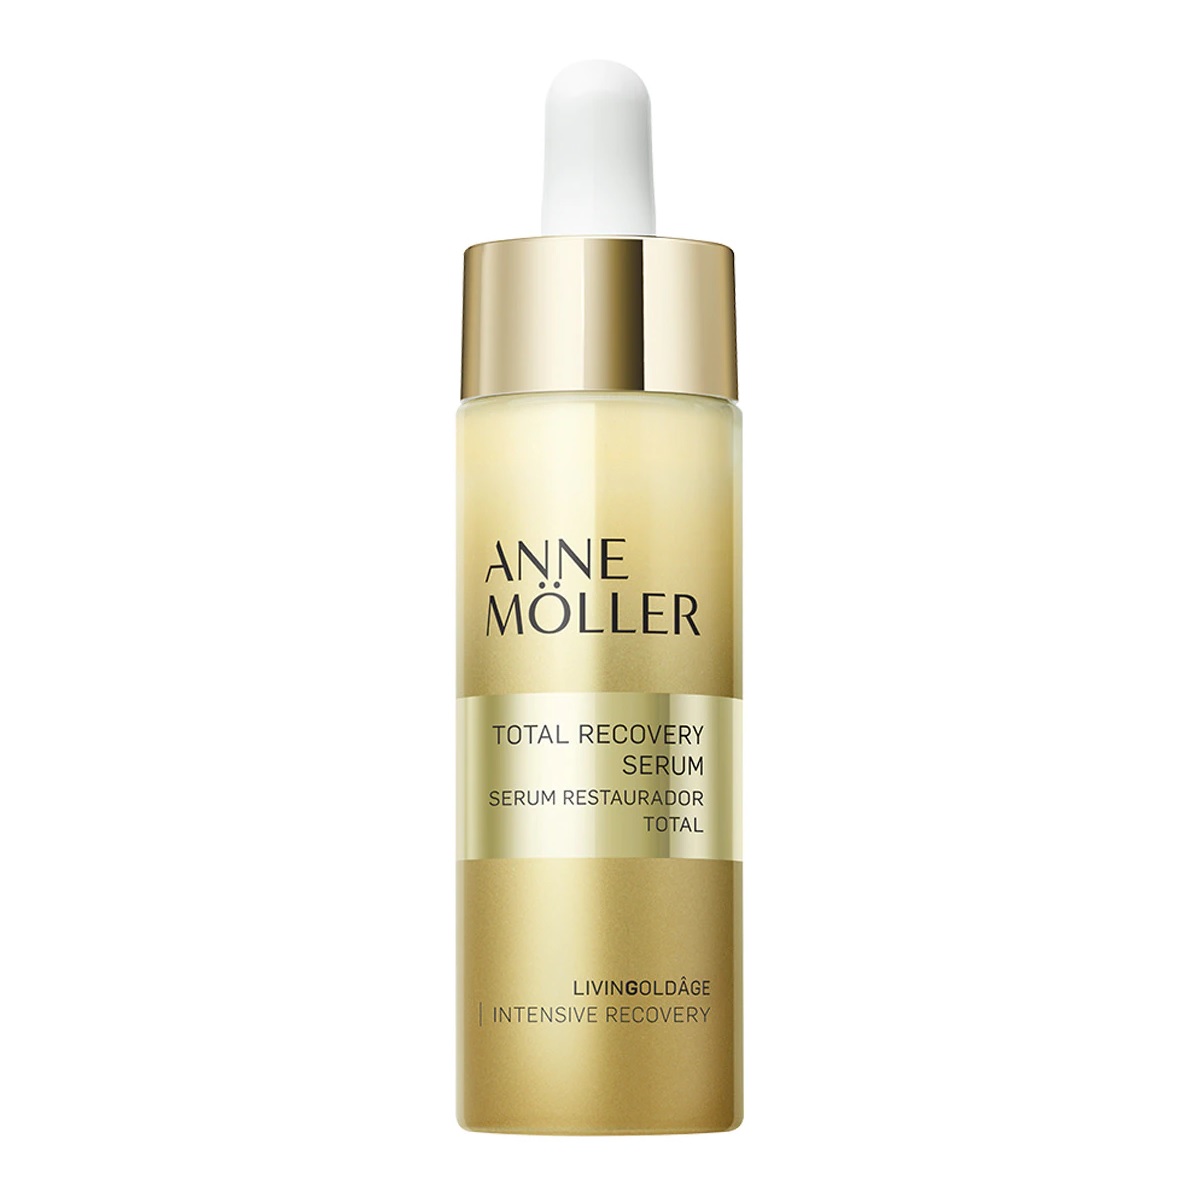 ANNE MOLLER LIVINGOLDAGE TOTAL RECOVERY SERUM 30 ML